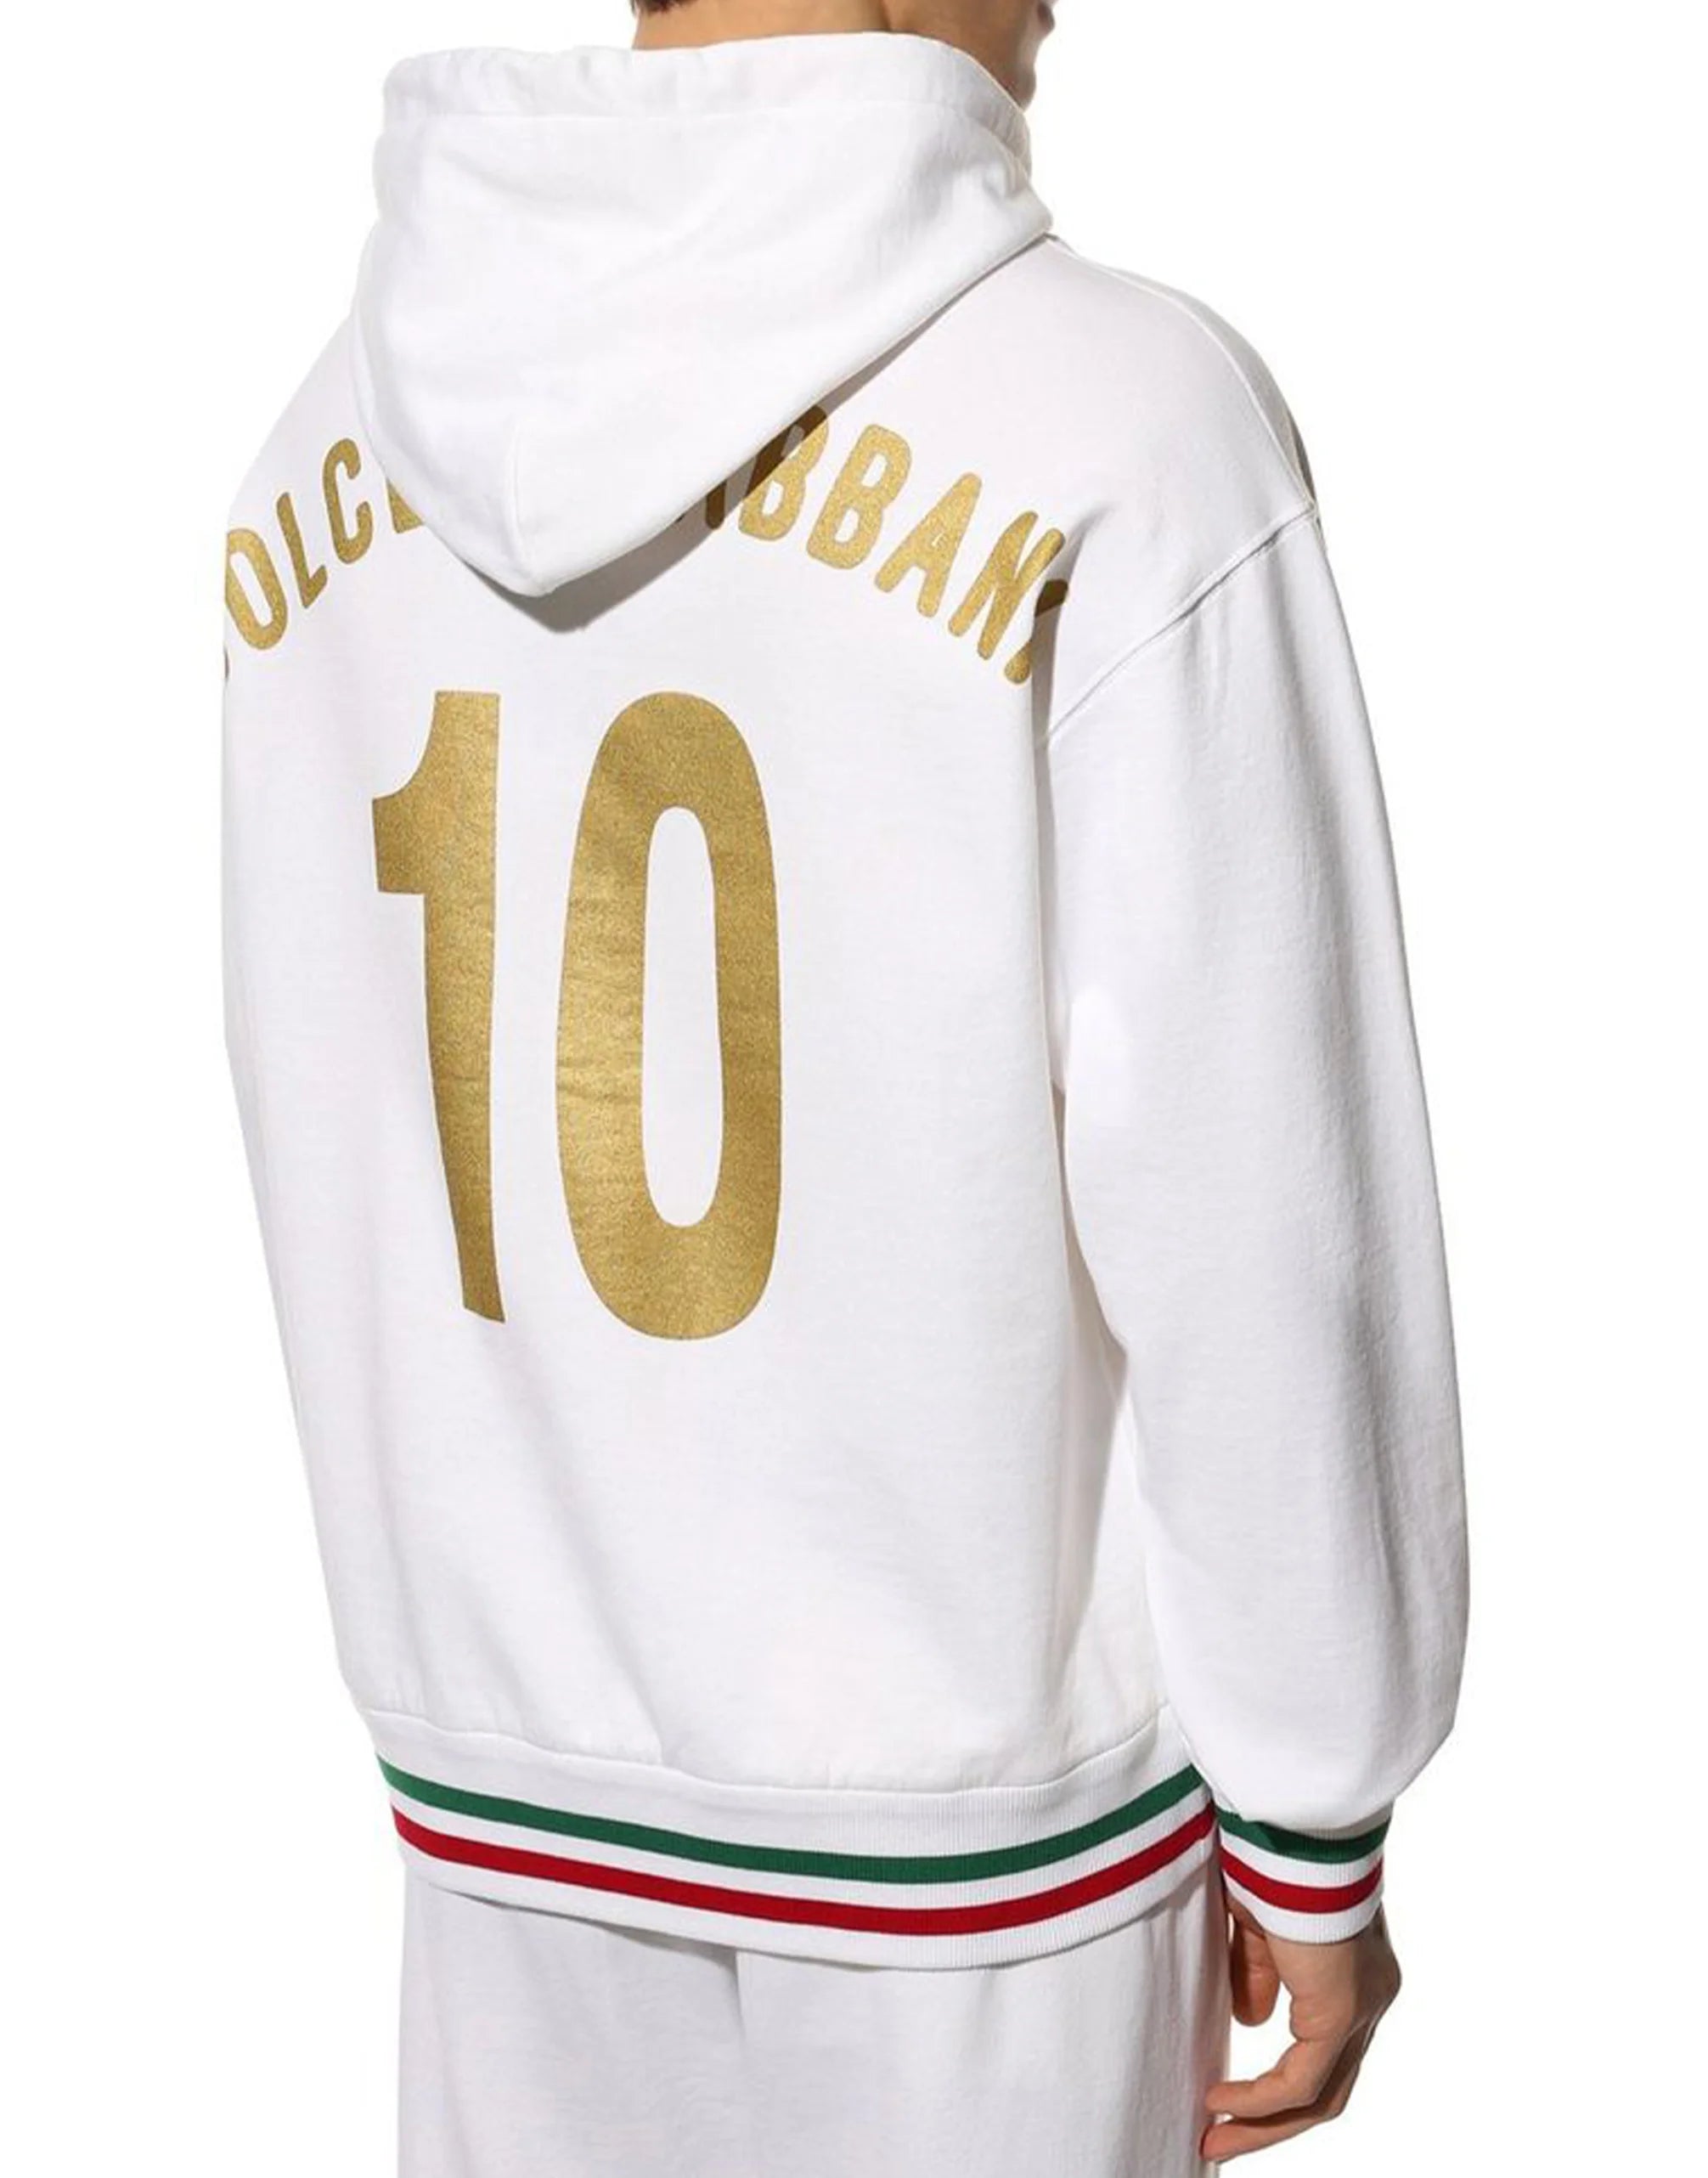 Italy-Patch Hoodie